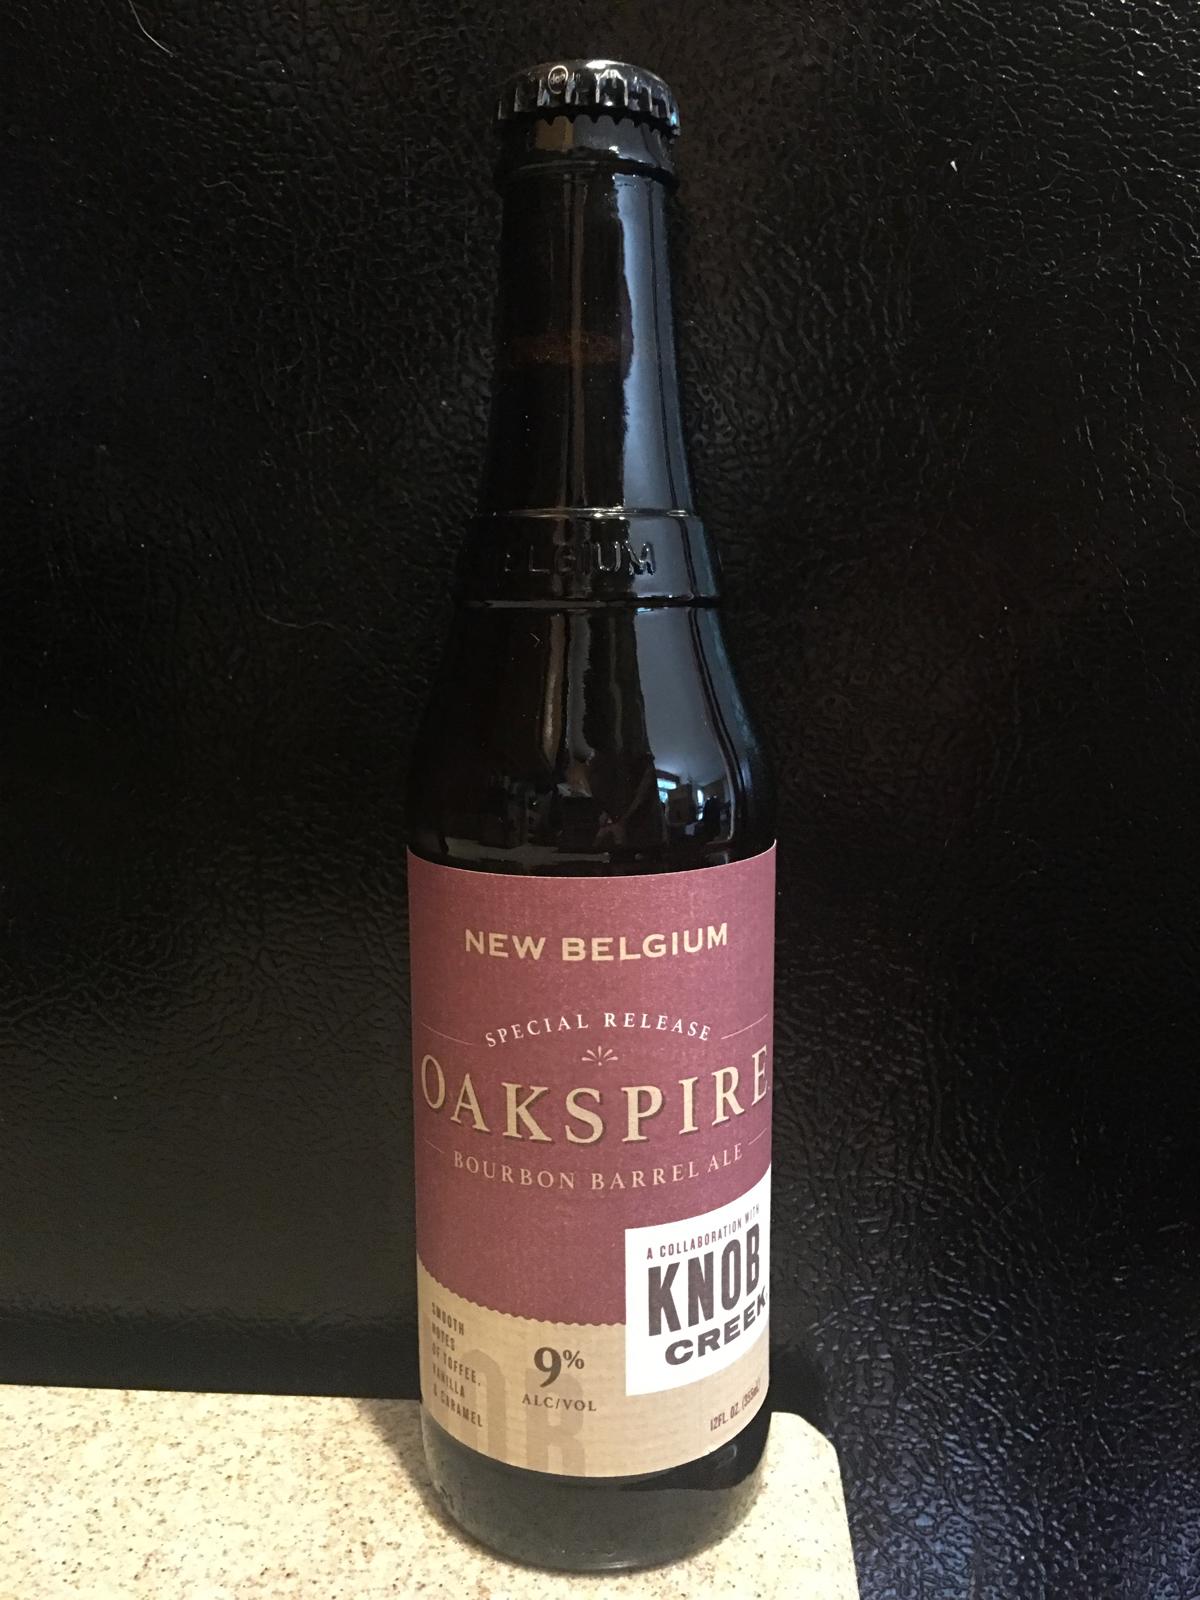 Oakspire: Special Release (Bourbon Barrel Aged) (Collaboration with Knob Creek)